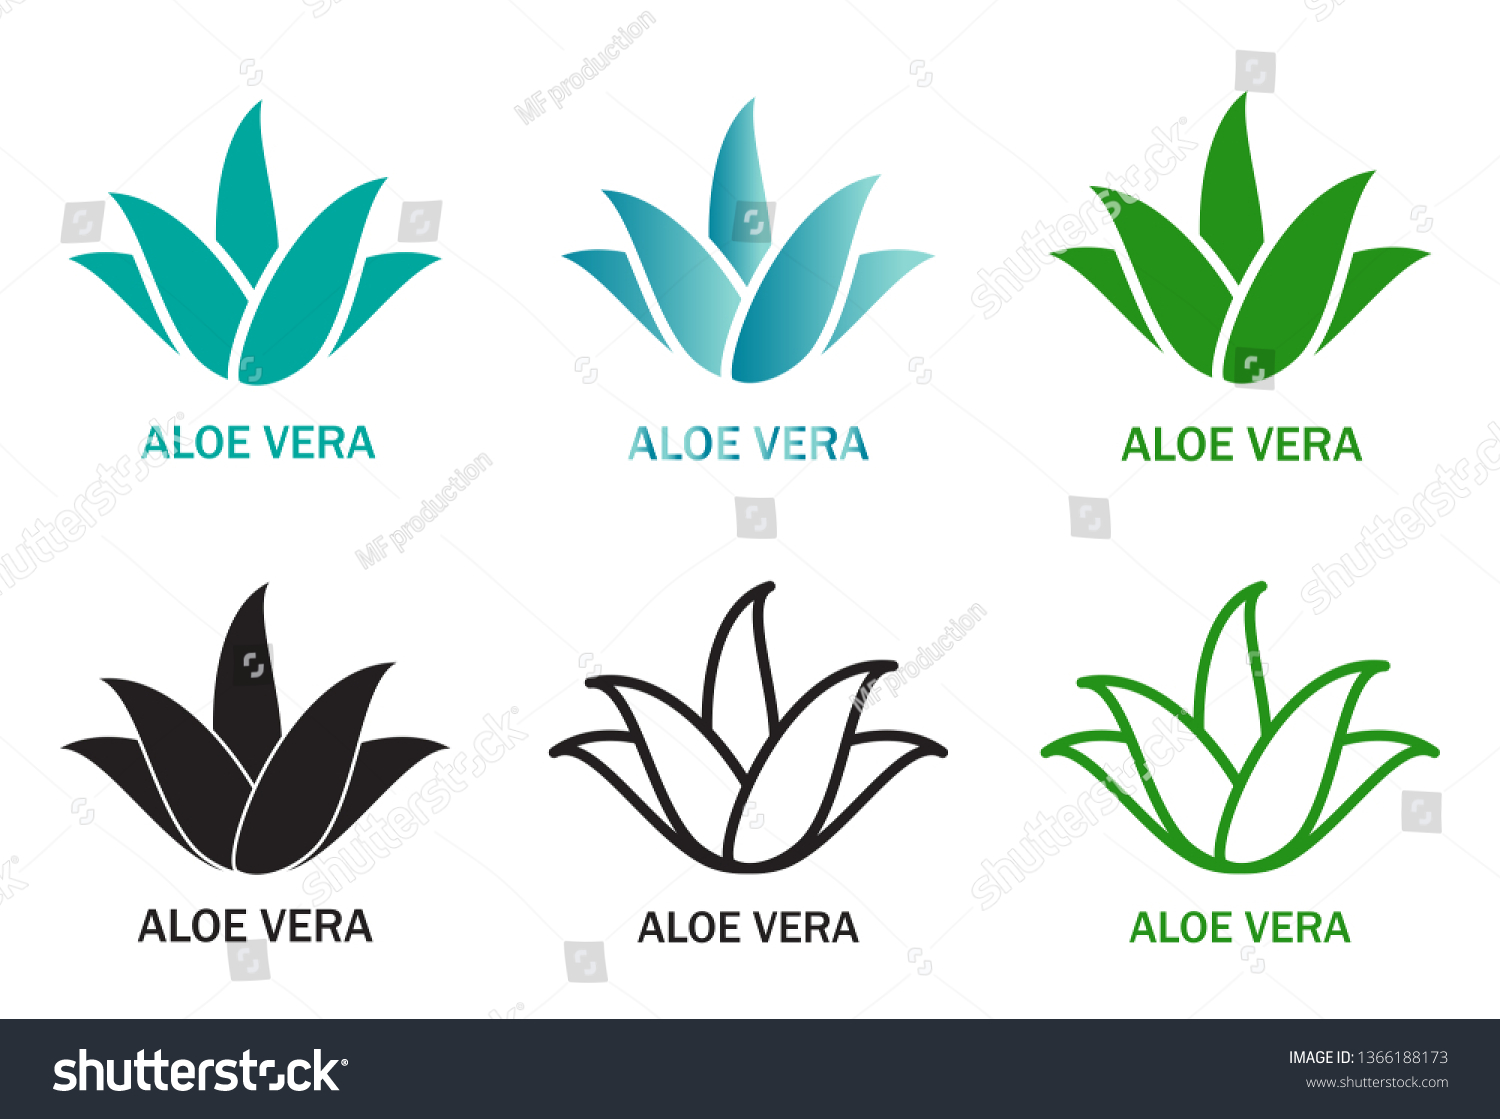 SVG of Aloe vera icons set isolated on white background. Collection of aloe vera green plants. Flat icons for logo, symbol, label and sticker. Creative art concept, vector illustration of aloe vera leaf svg